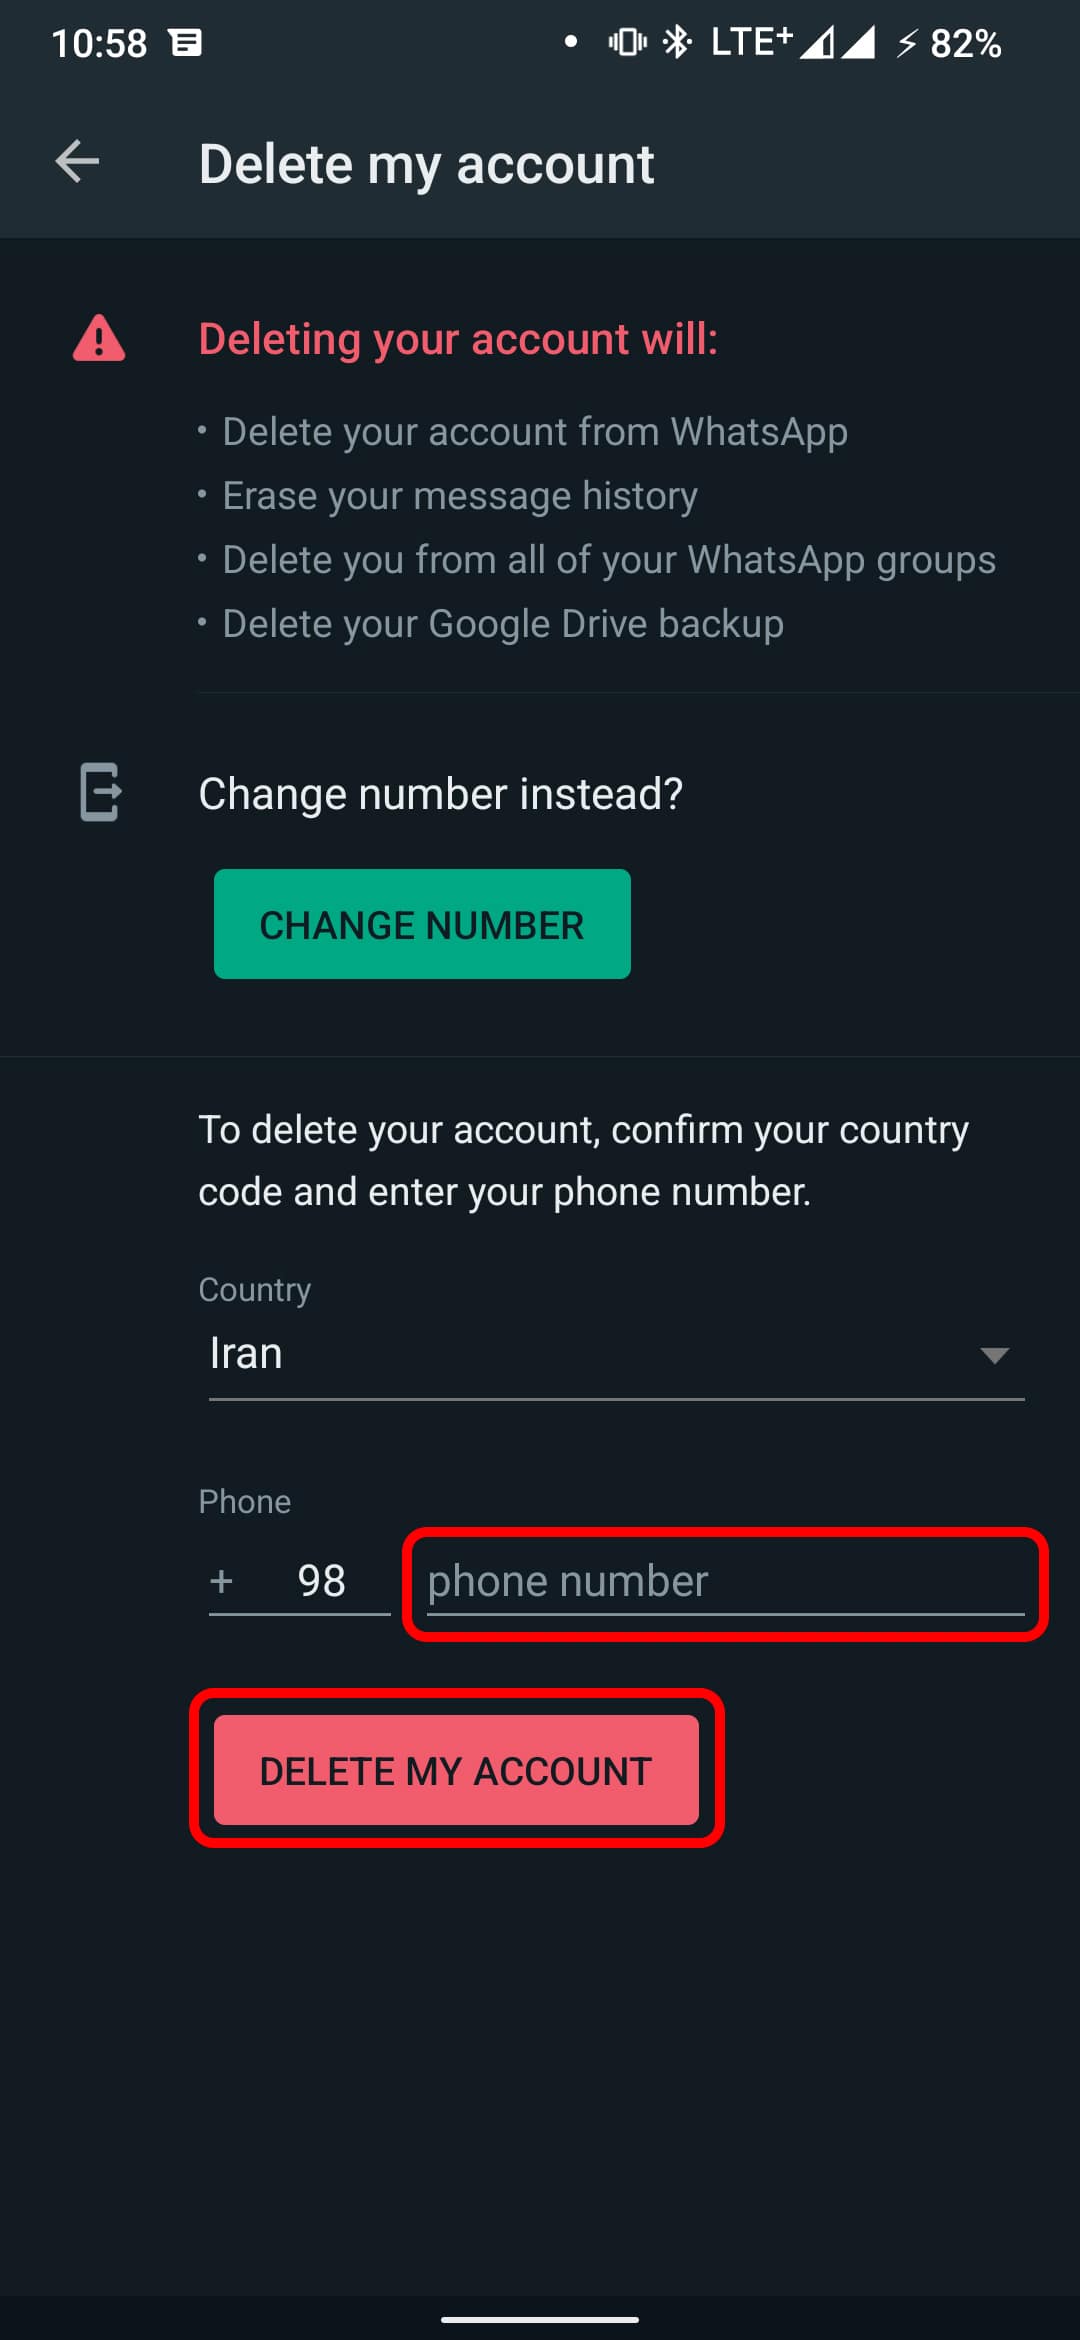 The fifth step of deleting WhatsApp account on Android